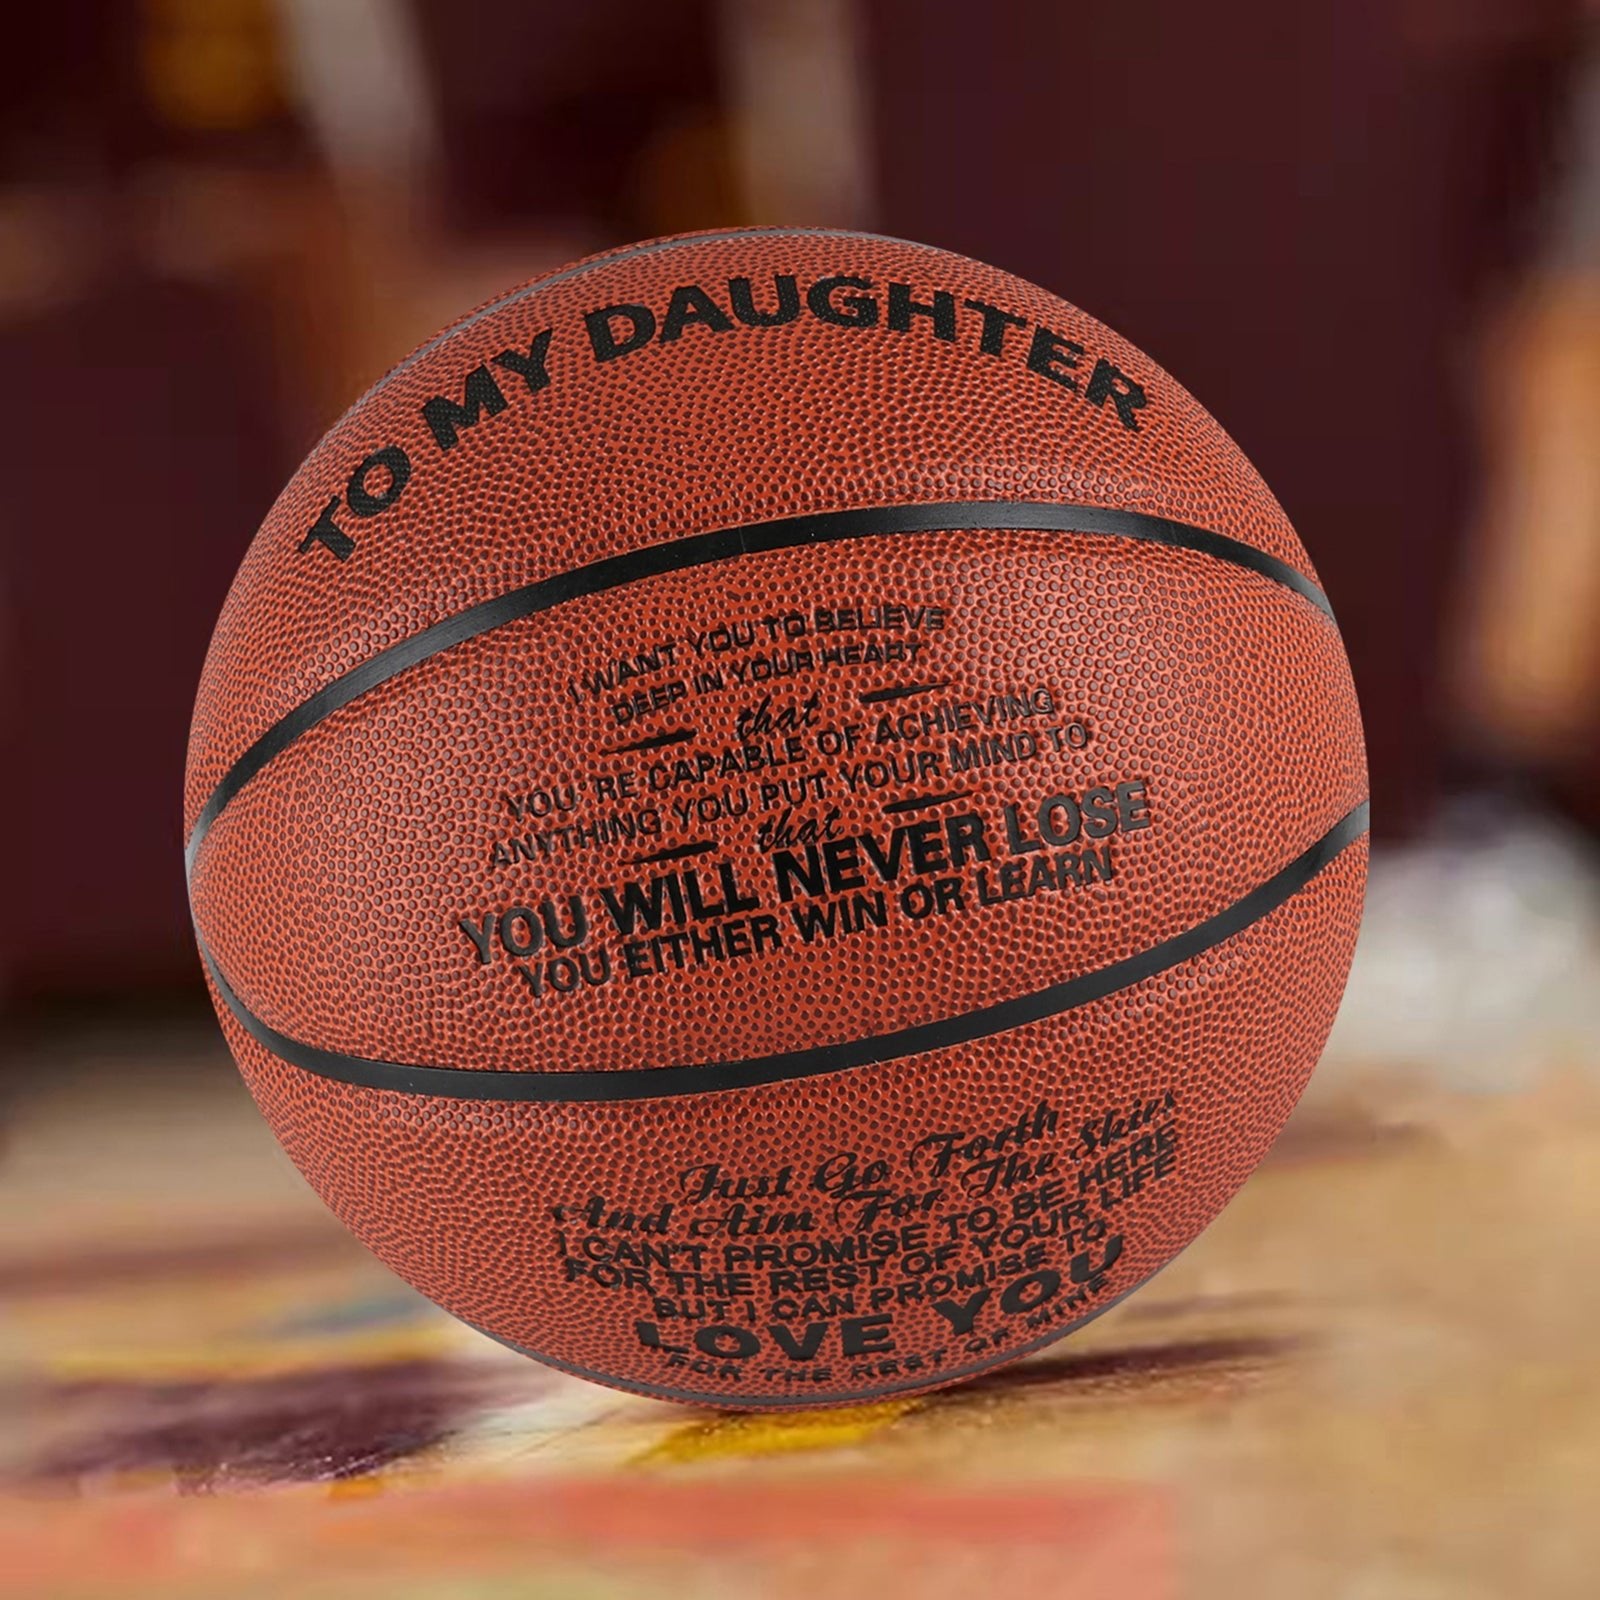 Personalized Letter Basketball For Daughter From Mom, Basketball Indoor/Outdoor Game Ball For Girl, Birthday Christmas Gift For Daughter From Mom - Family Watchs